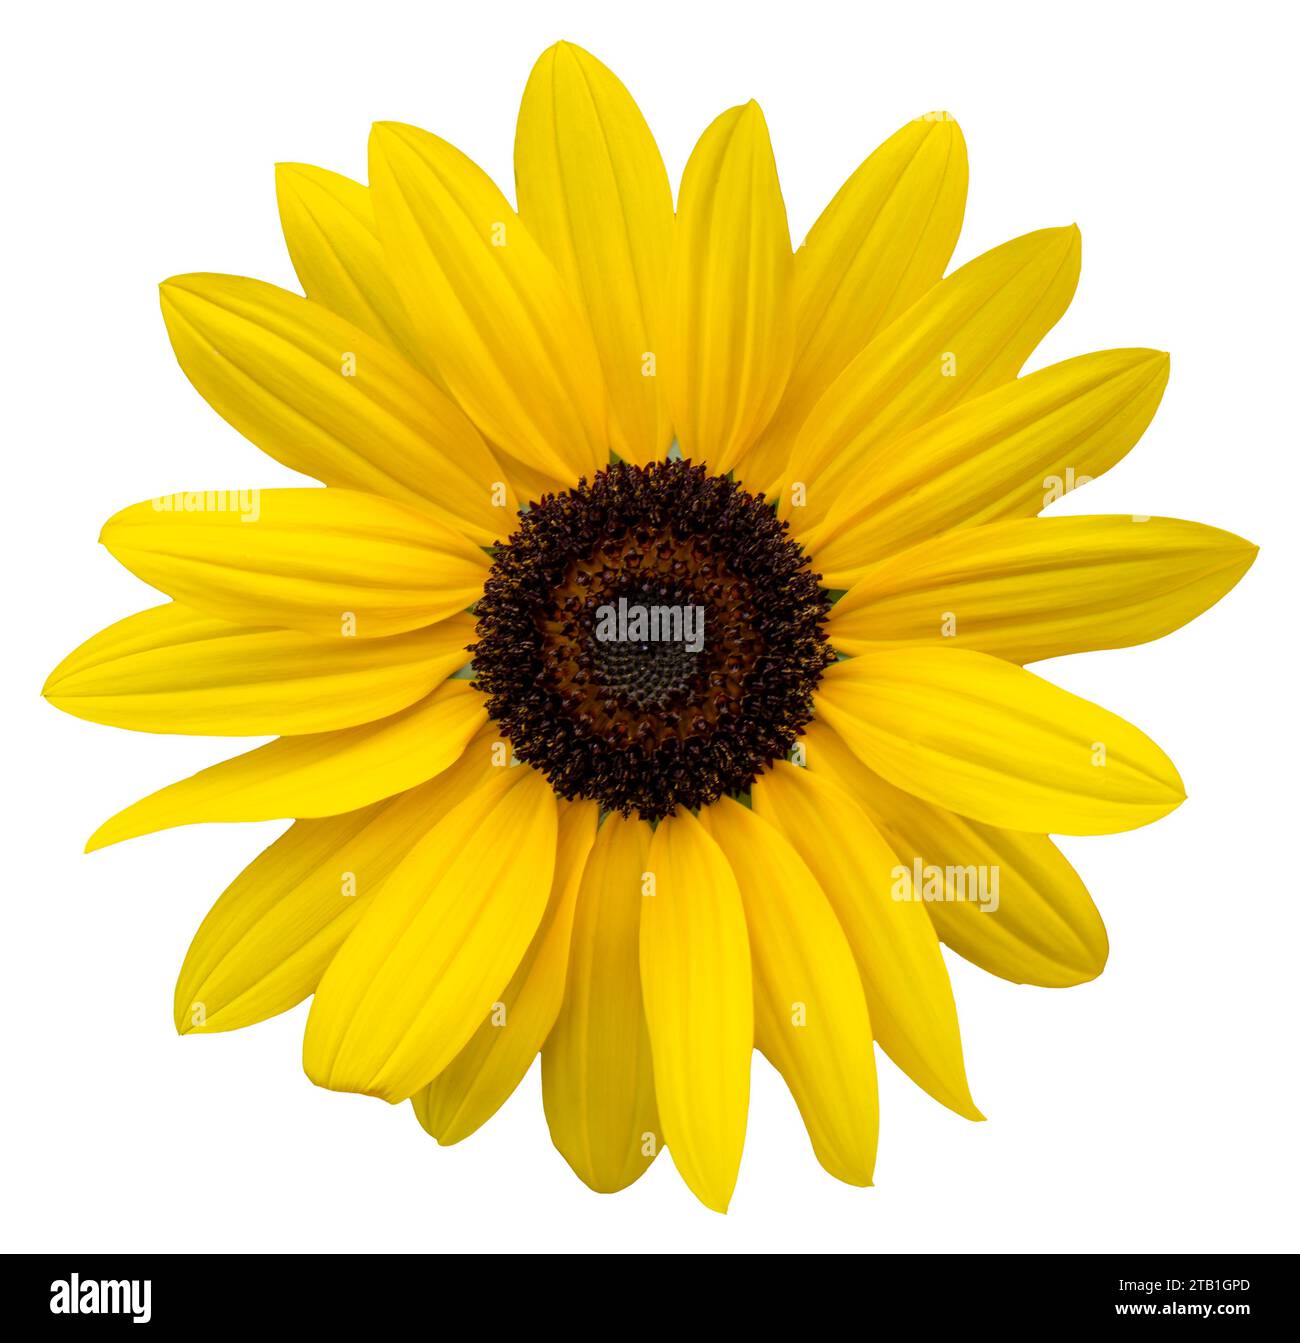 A yellow flower, like a sunflower. Isolate a large flower with clipping path. Taipei Chrysanthemum Exhibition. Stock Photo